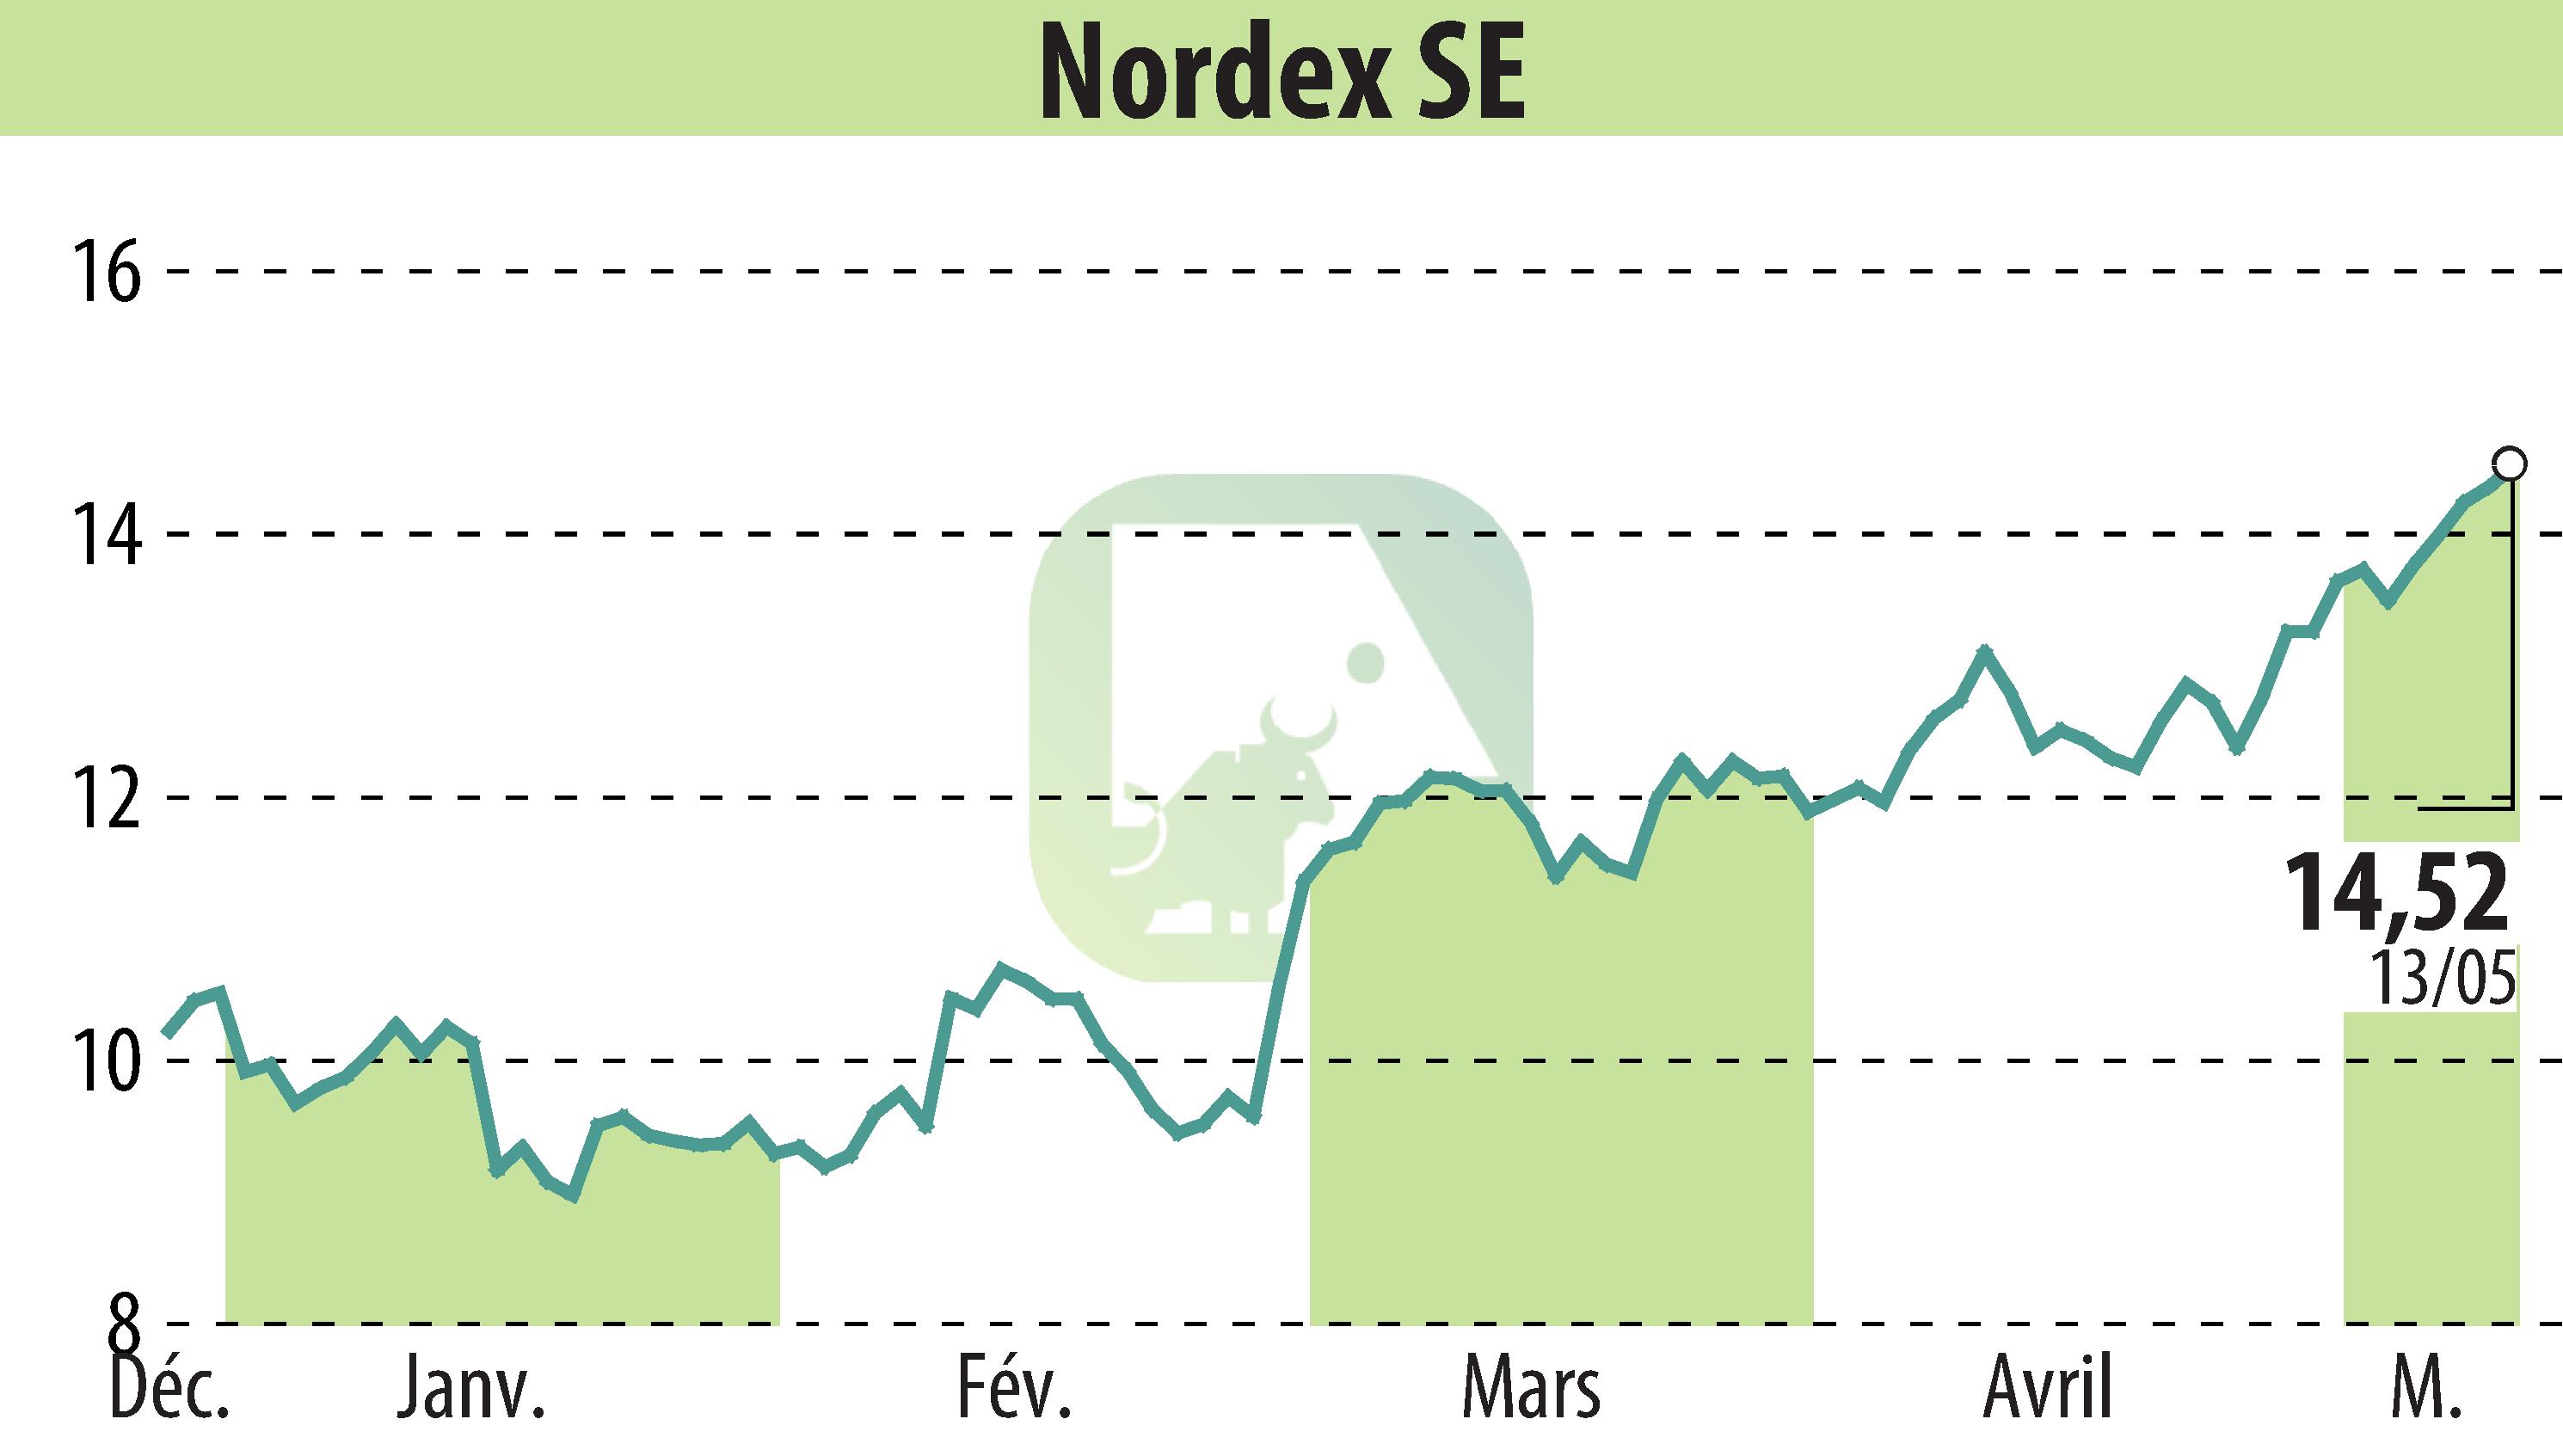 Stock price chart of Nordex SE (EBR:NDX1) showing fluctuations.